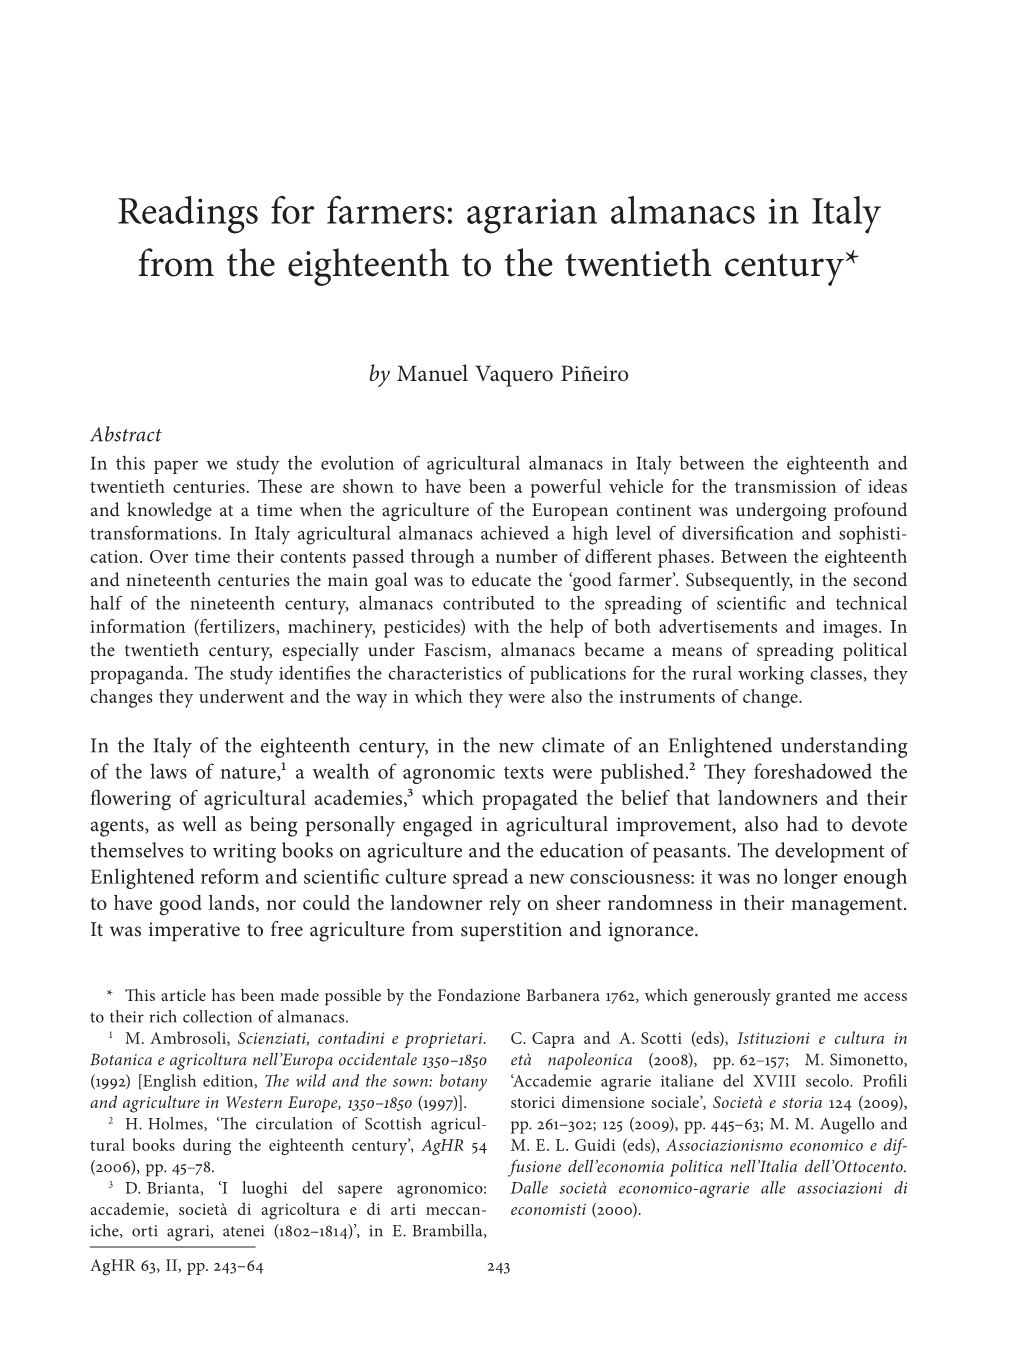 Readings for Farmers: Agrarian Almanacs in Italy from the Eighteenth to the Twentieth Century*